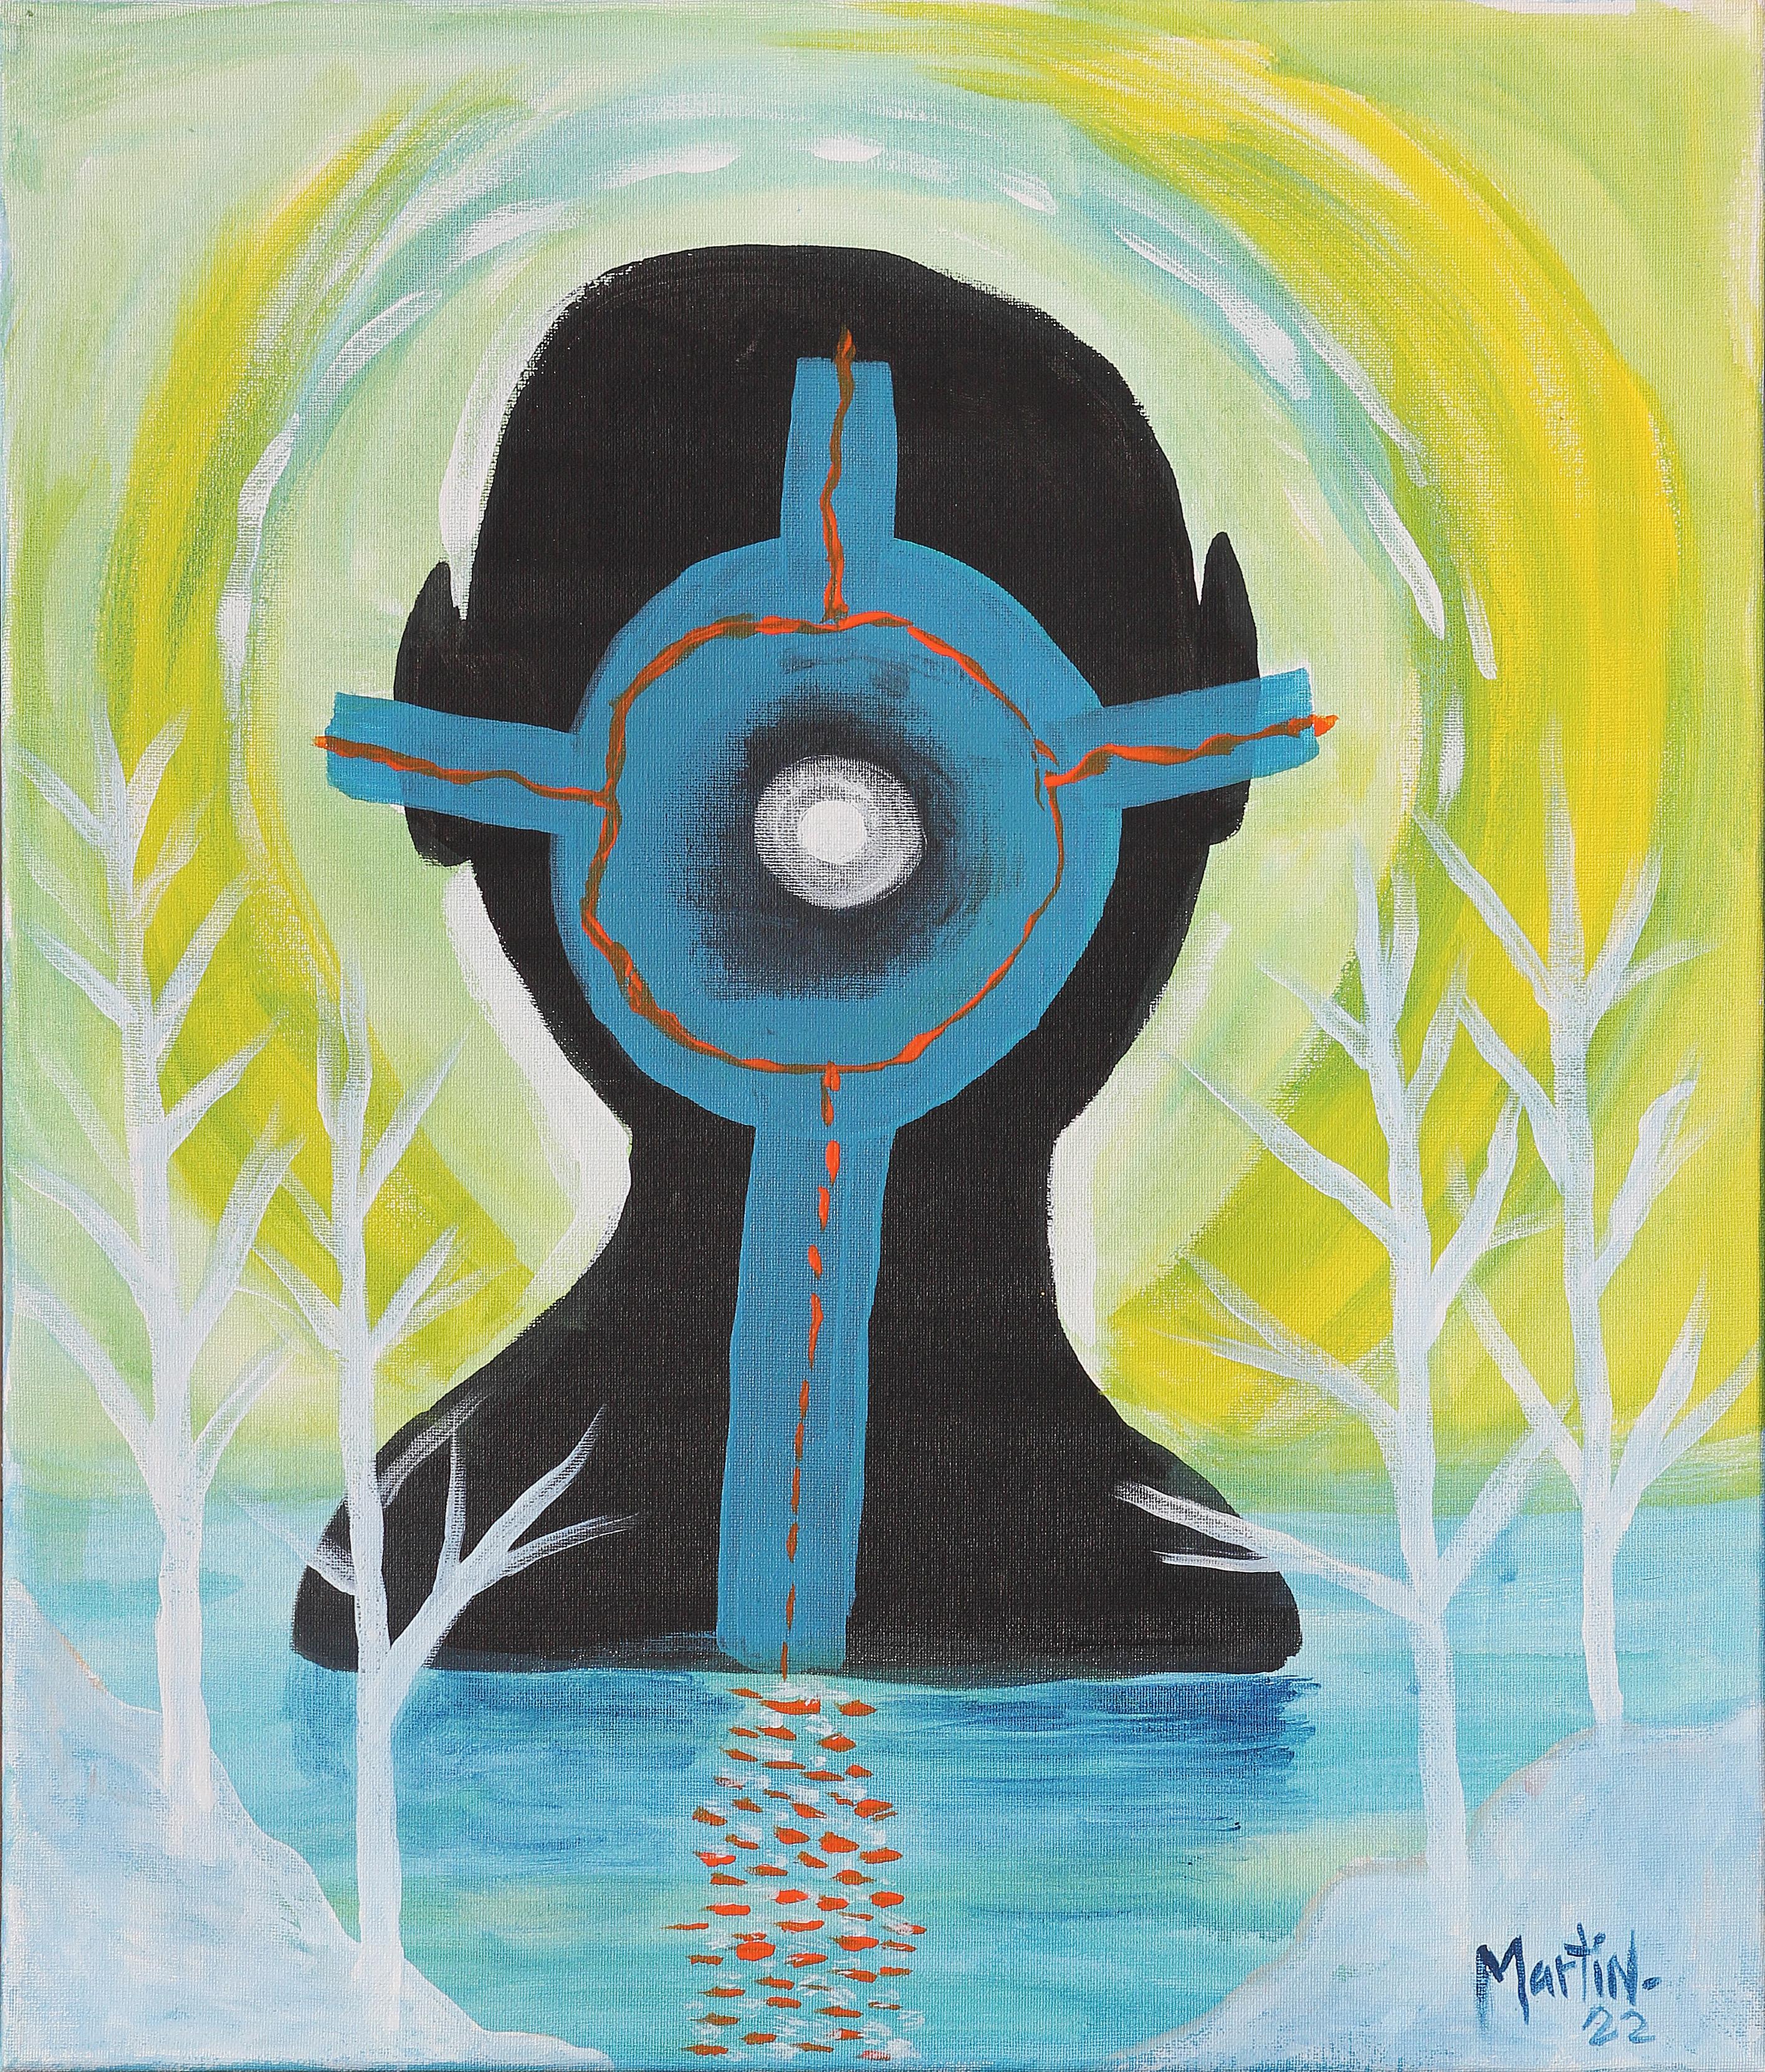 “Lake” Yellow, Black, and Blue Toned Abstract Figurative Silhouette Painting